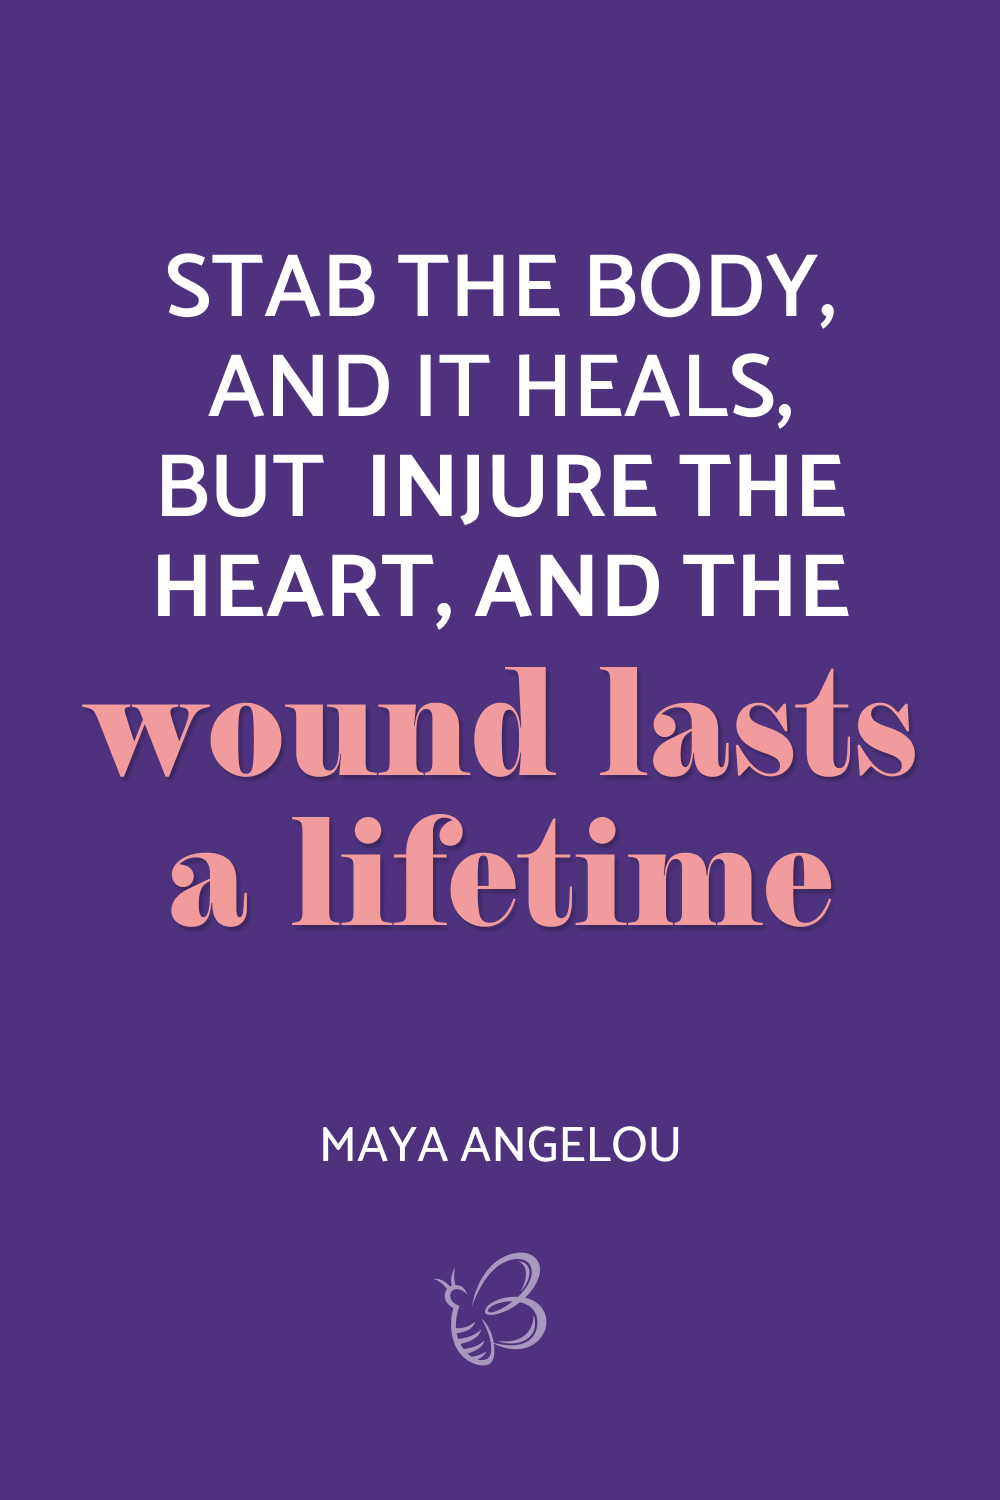 Stab the body, and it heals, but injure the heart, and the wound lasts a lifetime